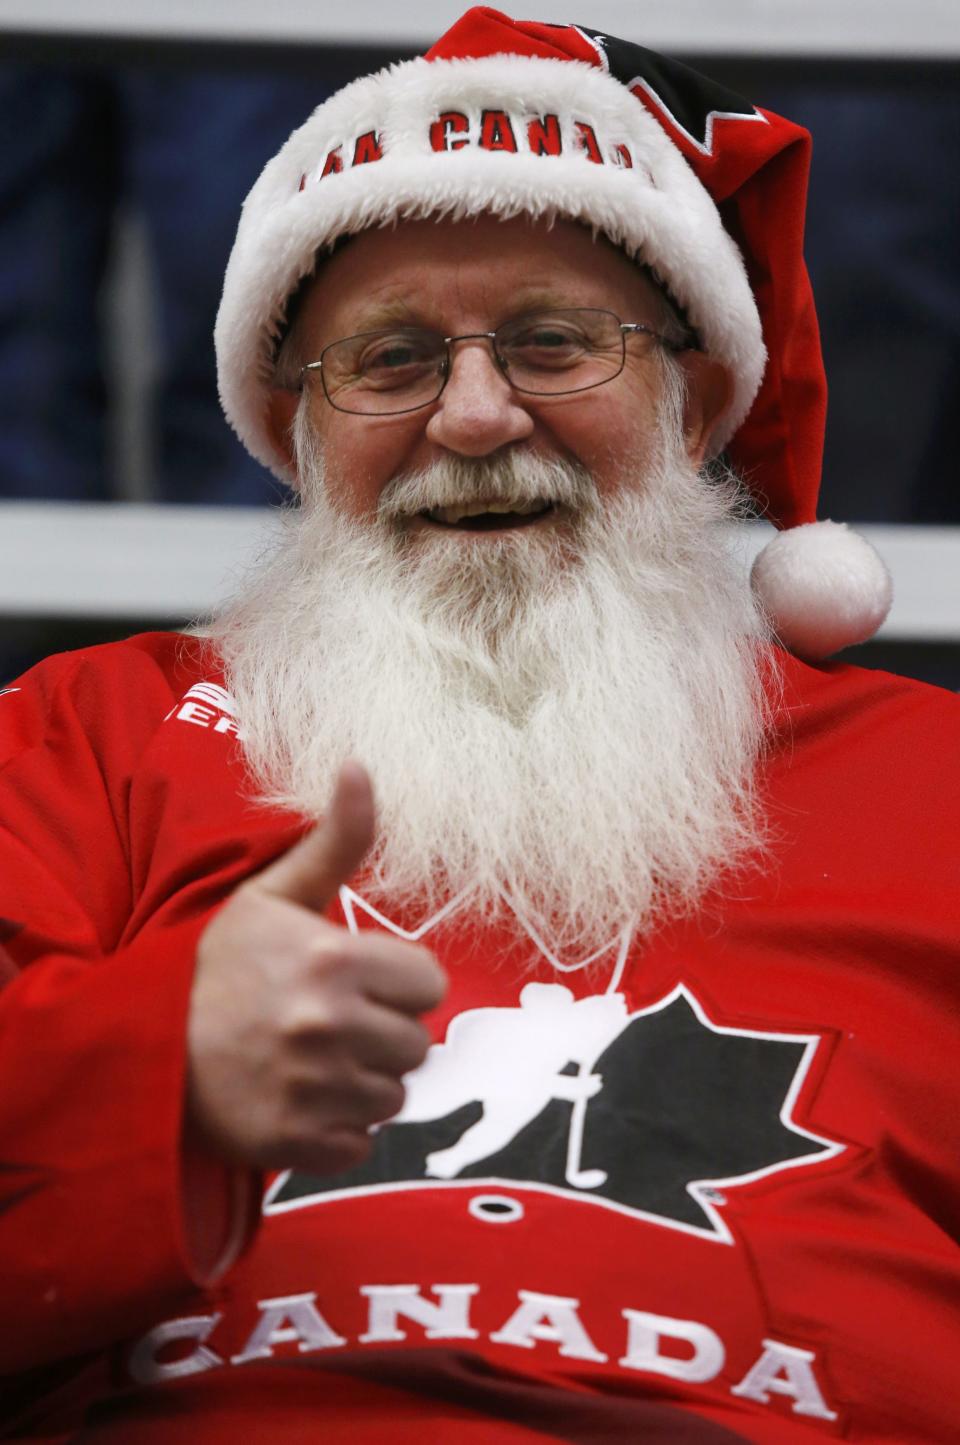 A Canadian supporter cheers before Canada plays the United States in their IIHF World Junior Championship ice hockey game in Malmo, Sweden, December 31, 2013. REUTERS/Alexander Demianchuk (SWEDEN - Tags: SPORT ICE HOCKEY)